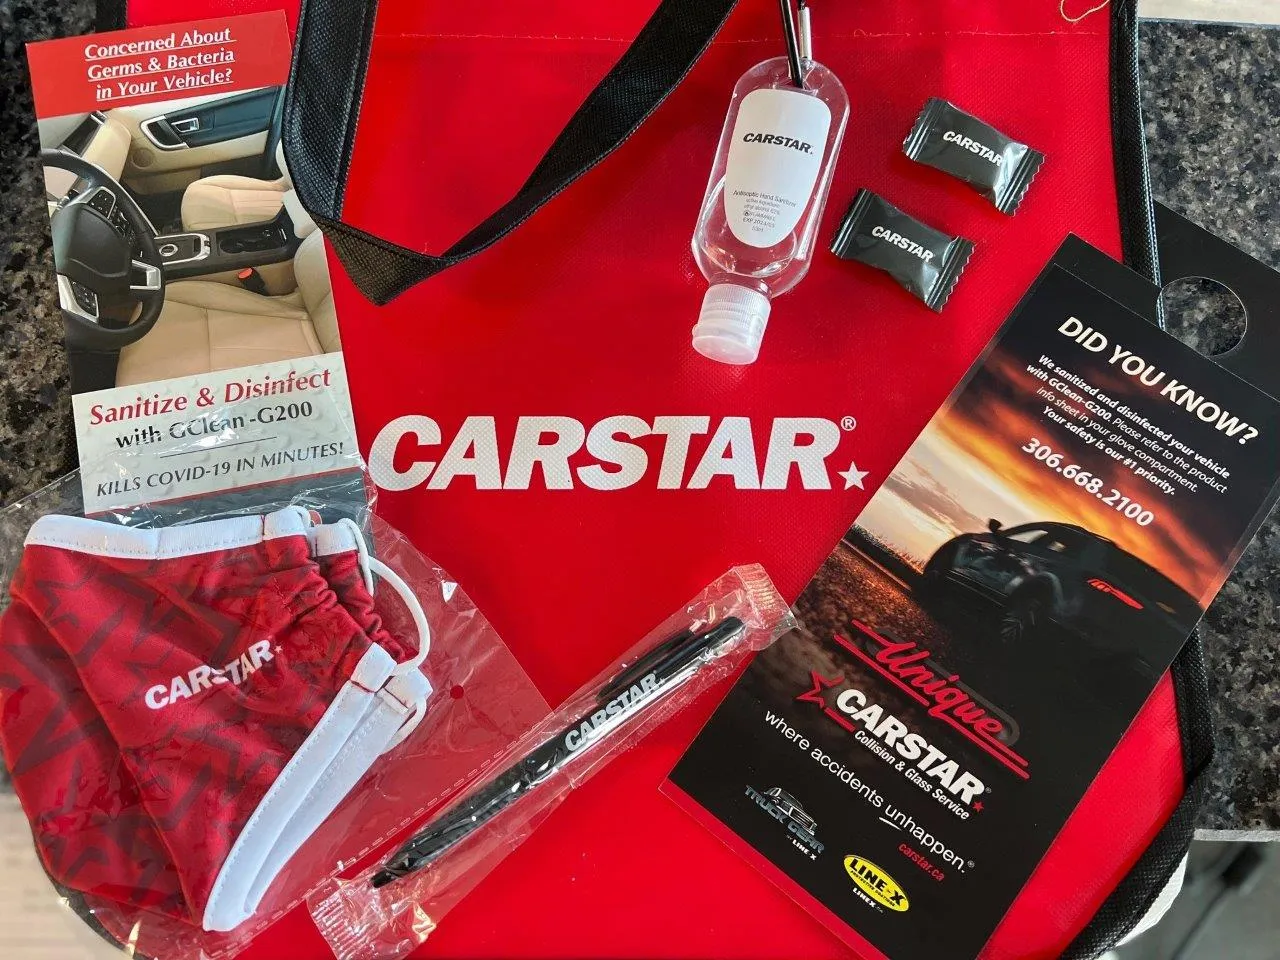 A red bag with carstar written on it